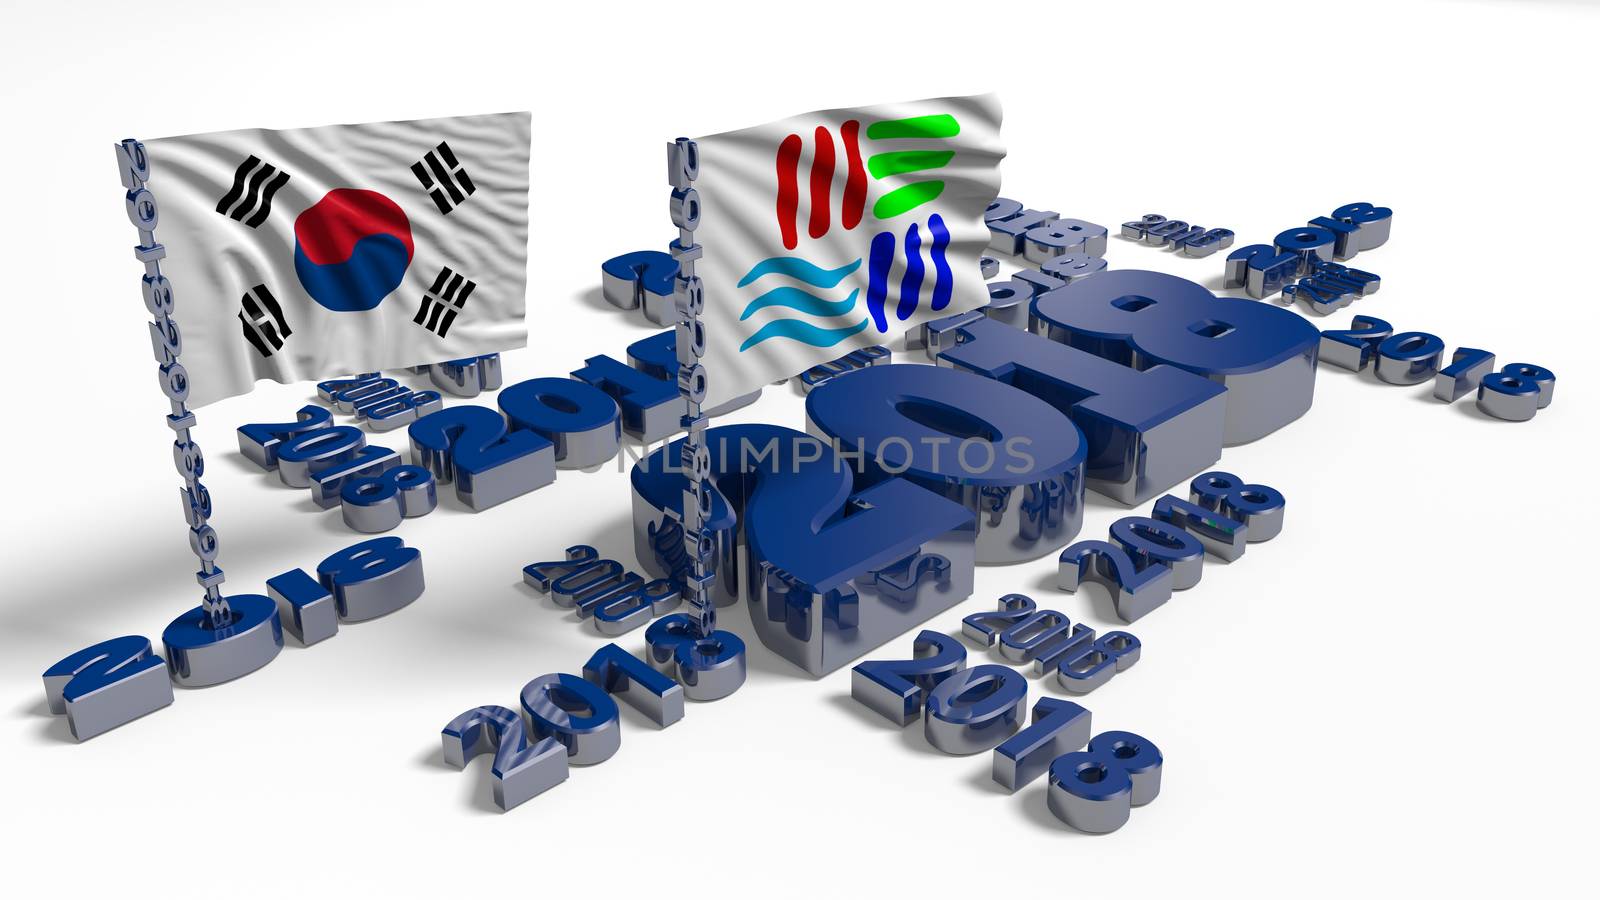 2018 Korean and Pyeongchang Flags with a White Background